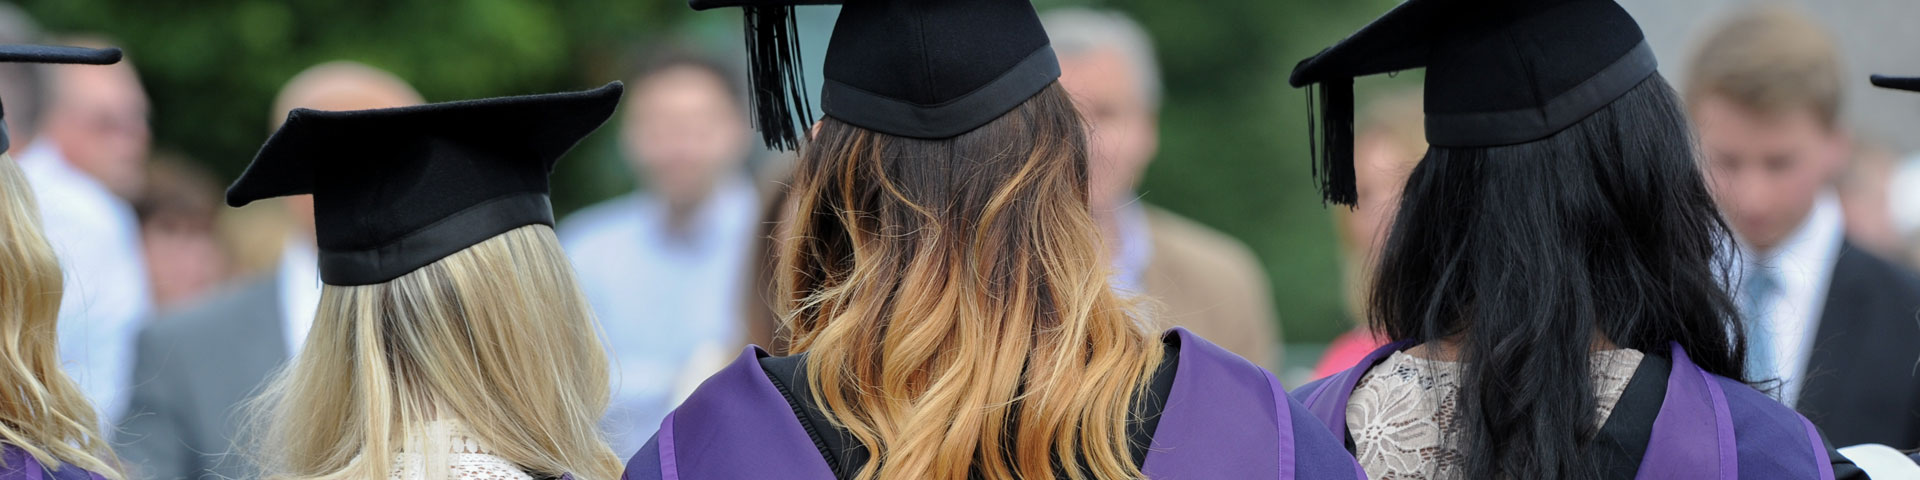 Shot of the backs of three female graduates wearing mortarboards and gowns.